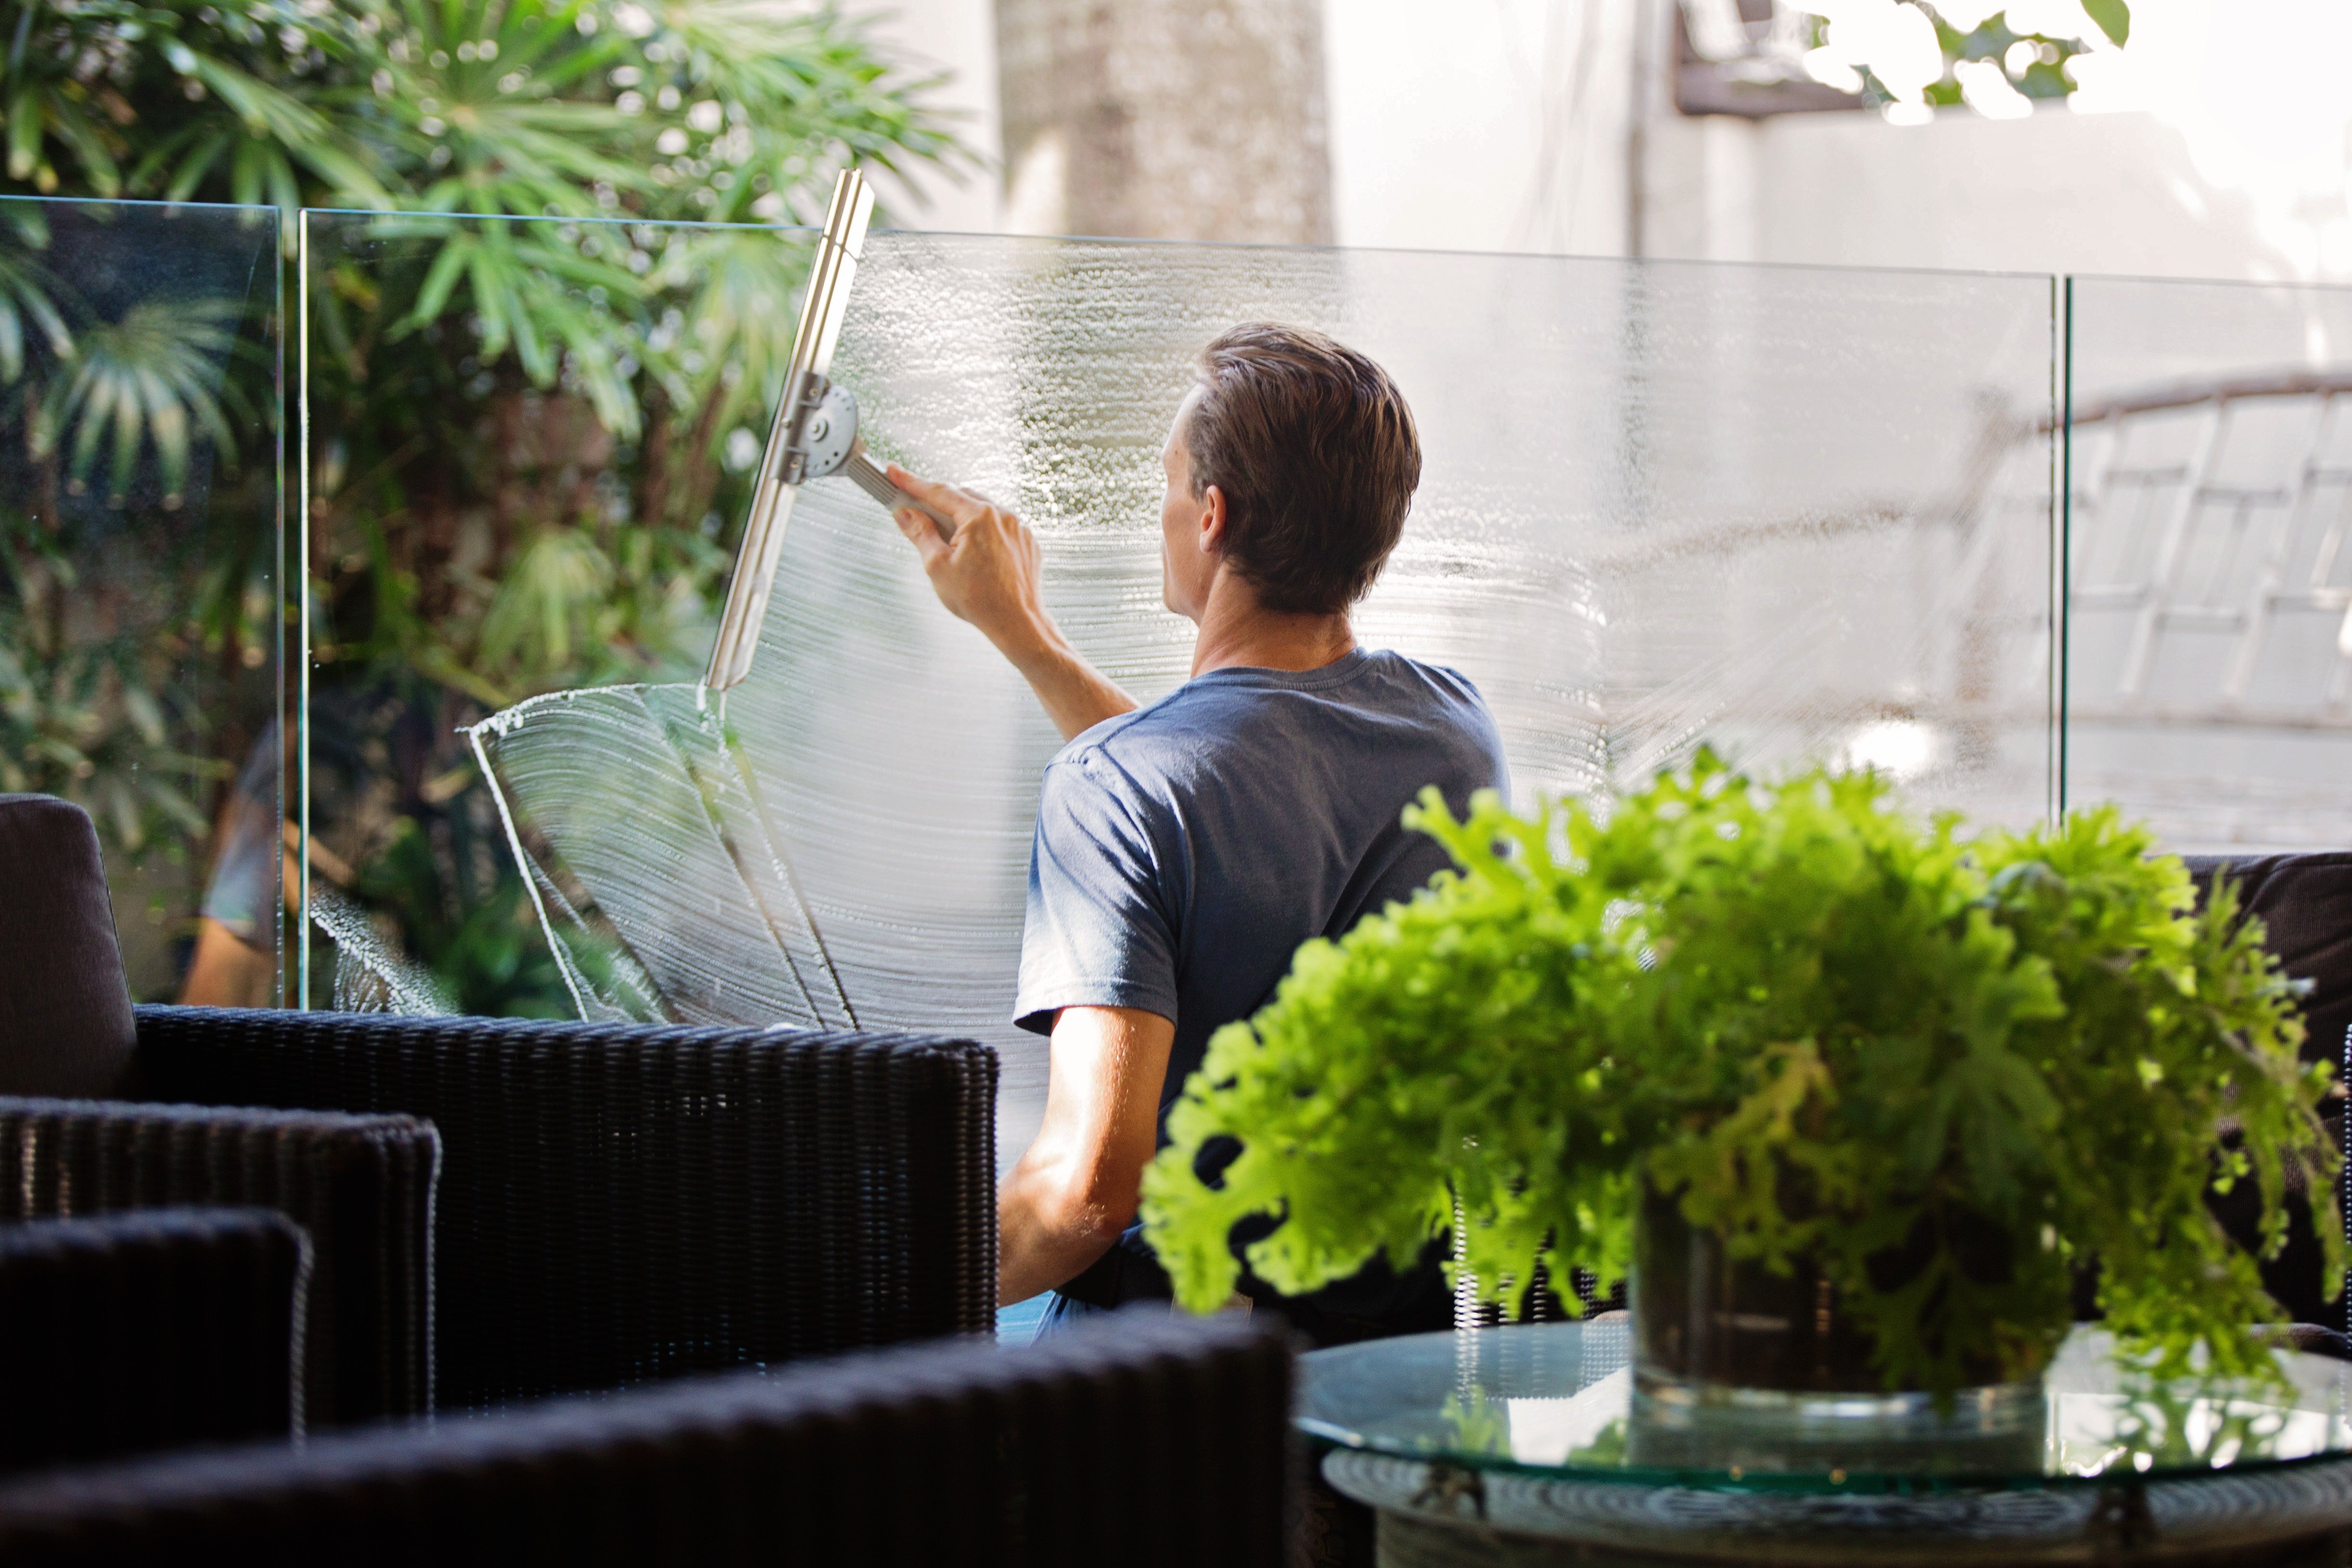 Jacob worked as a window cleaner at a successful corporation. | Source: Pexels